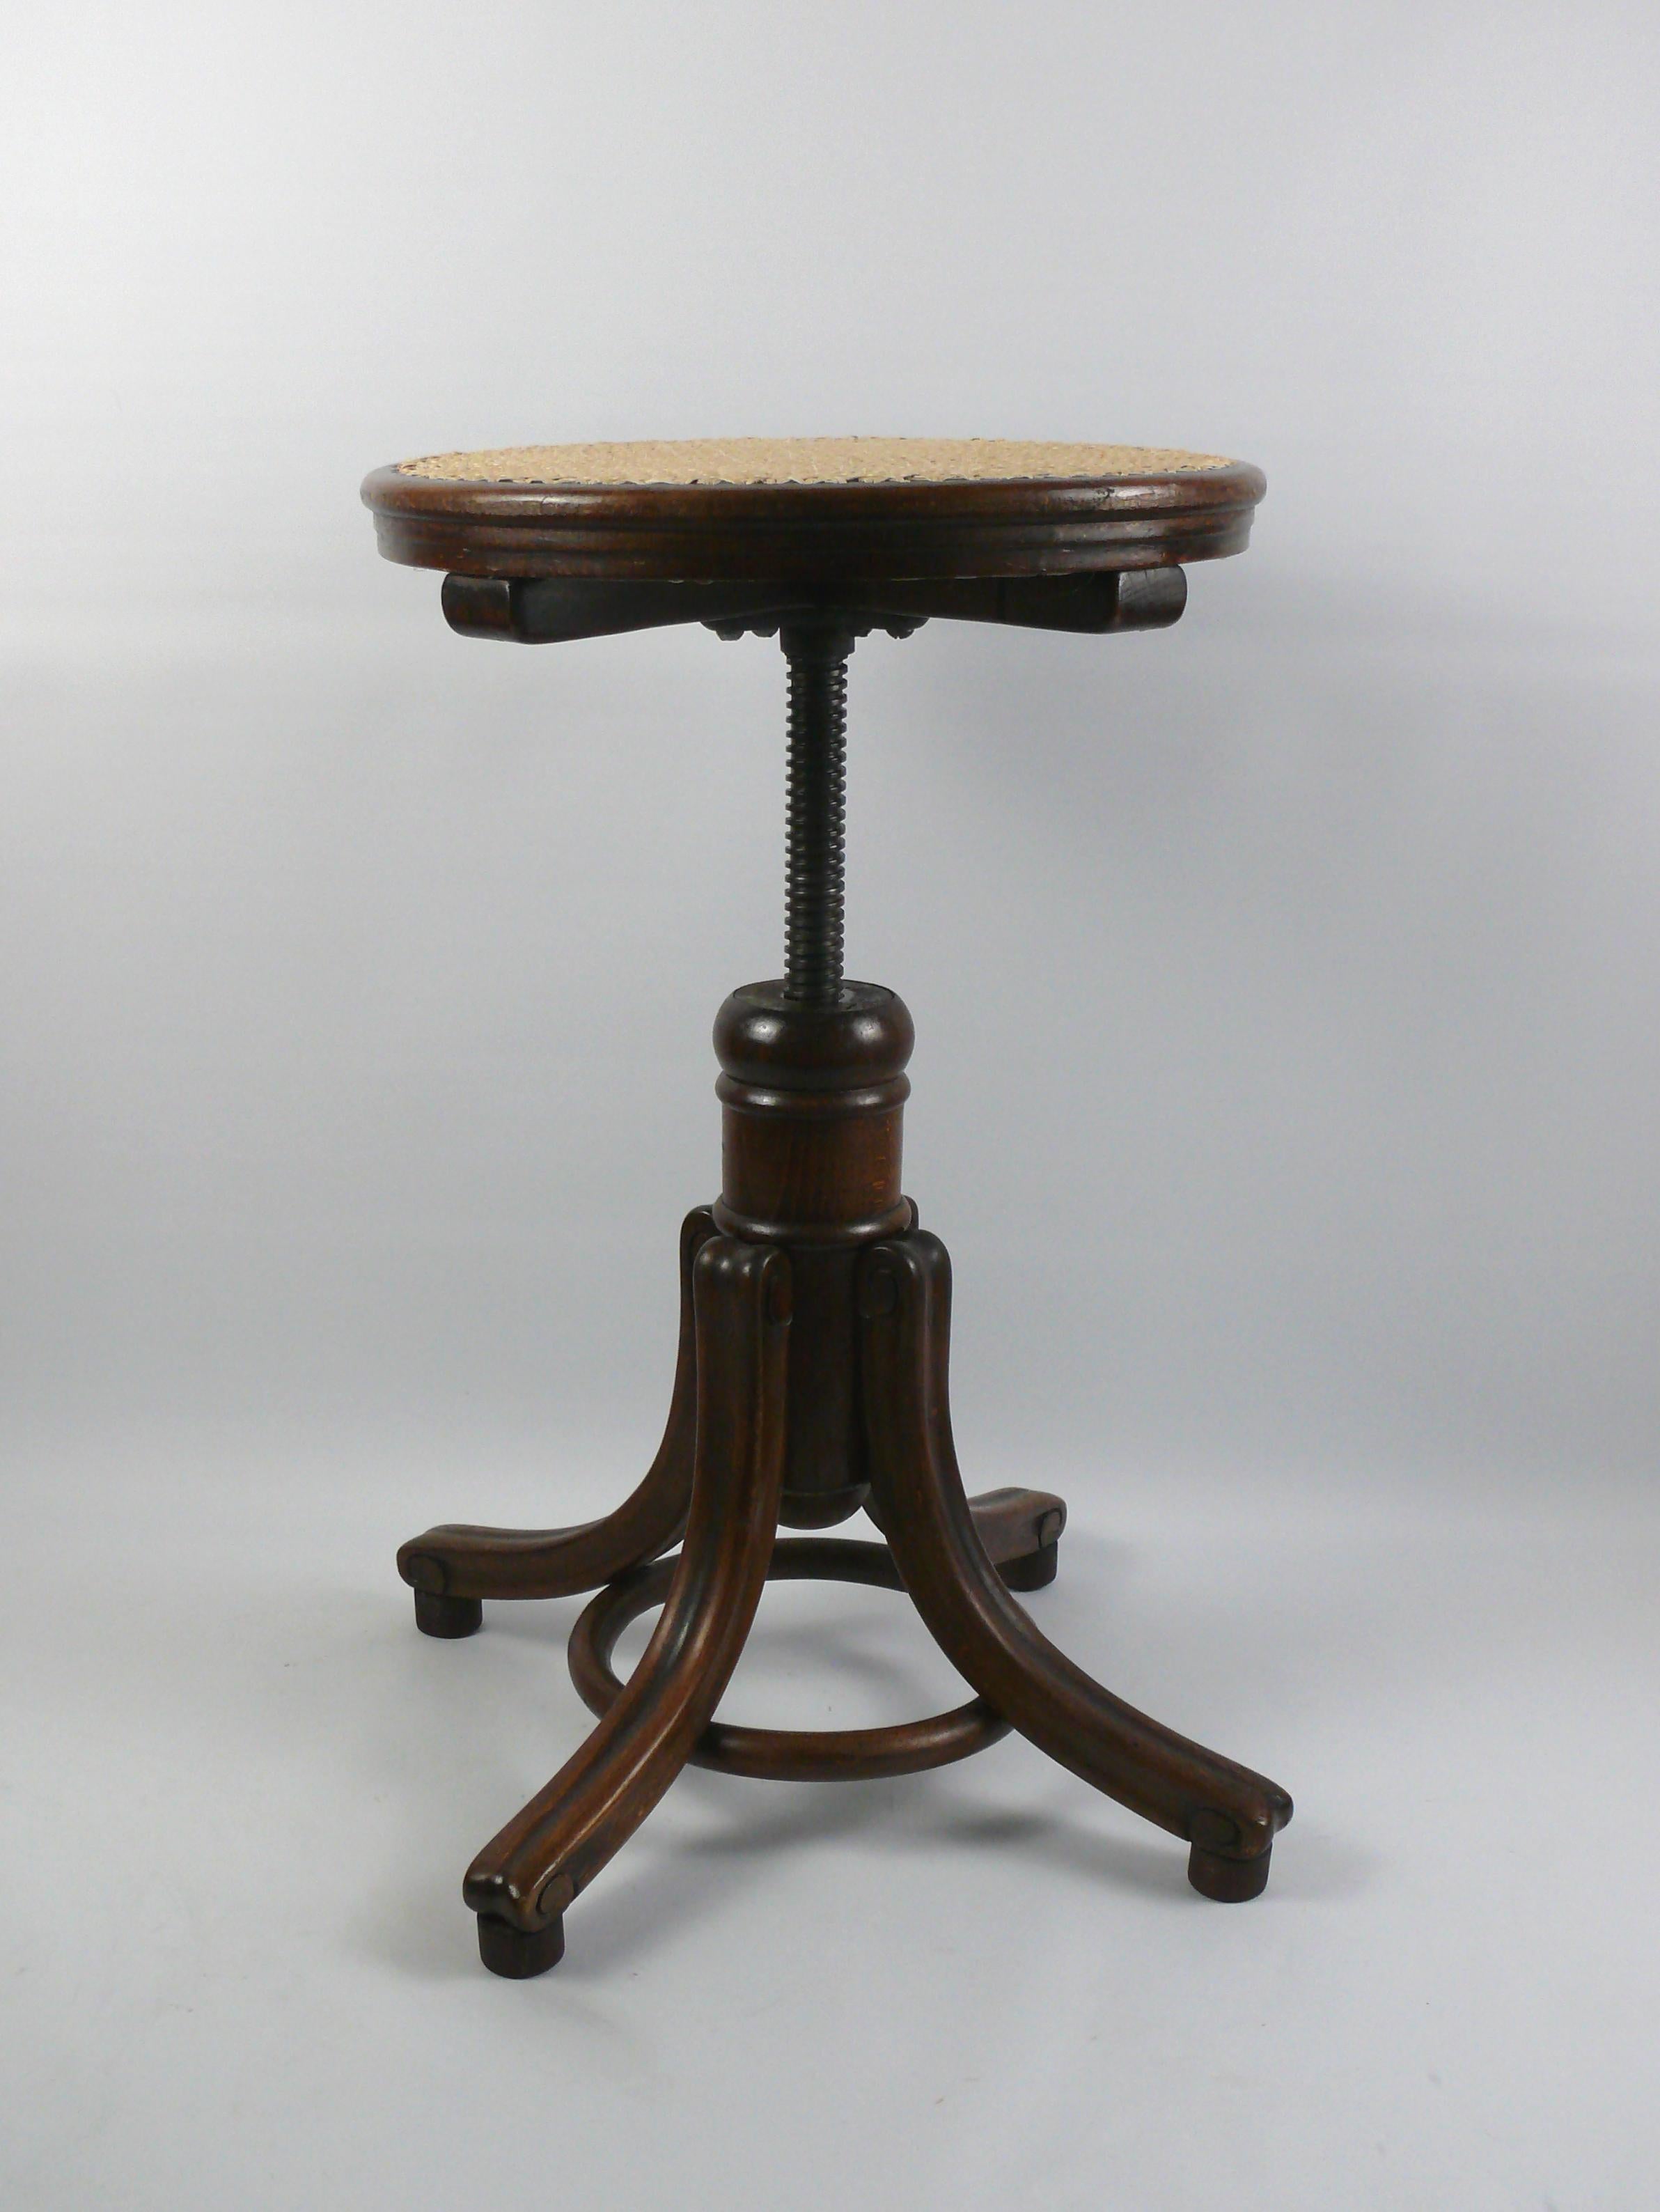 Piano stool by the traditional company Gebrüder Thonet, Vienna from the late 19th or early 20th century. The piano stool is made of solid wood and has a frame with a bentwood ring. The curved feet are held together by the wooden ring made of curved